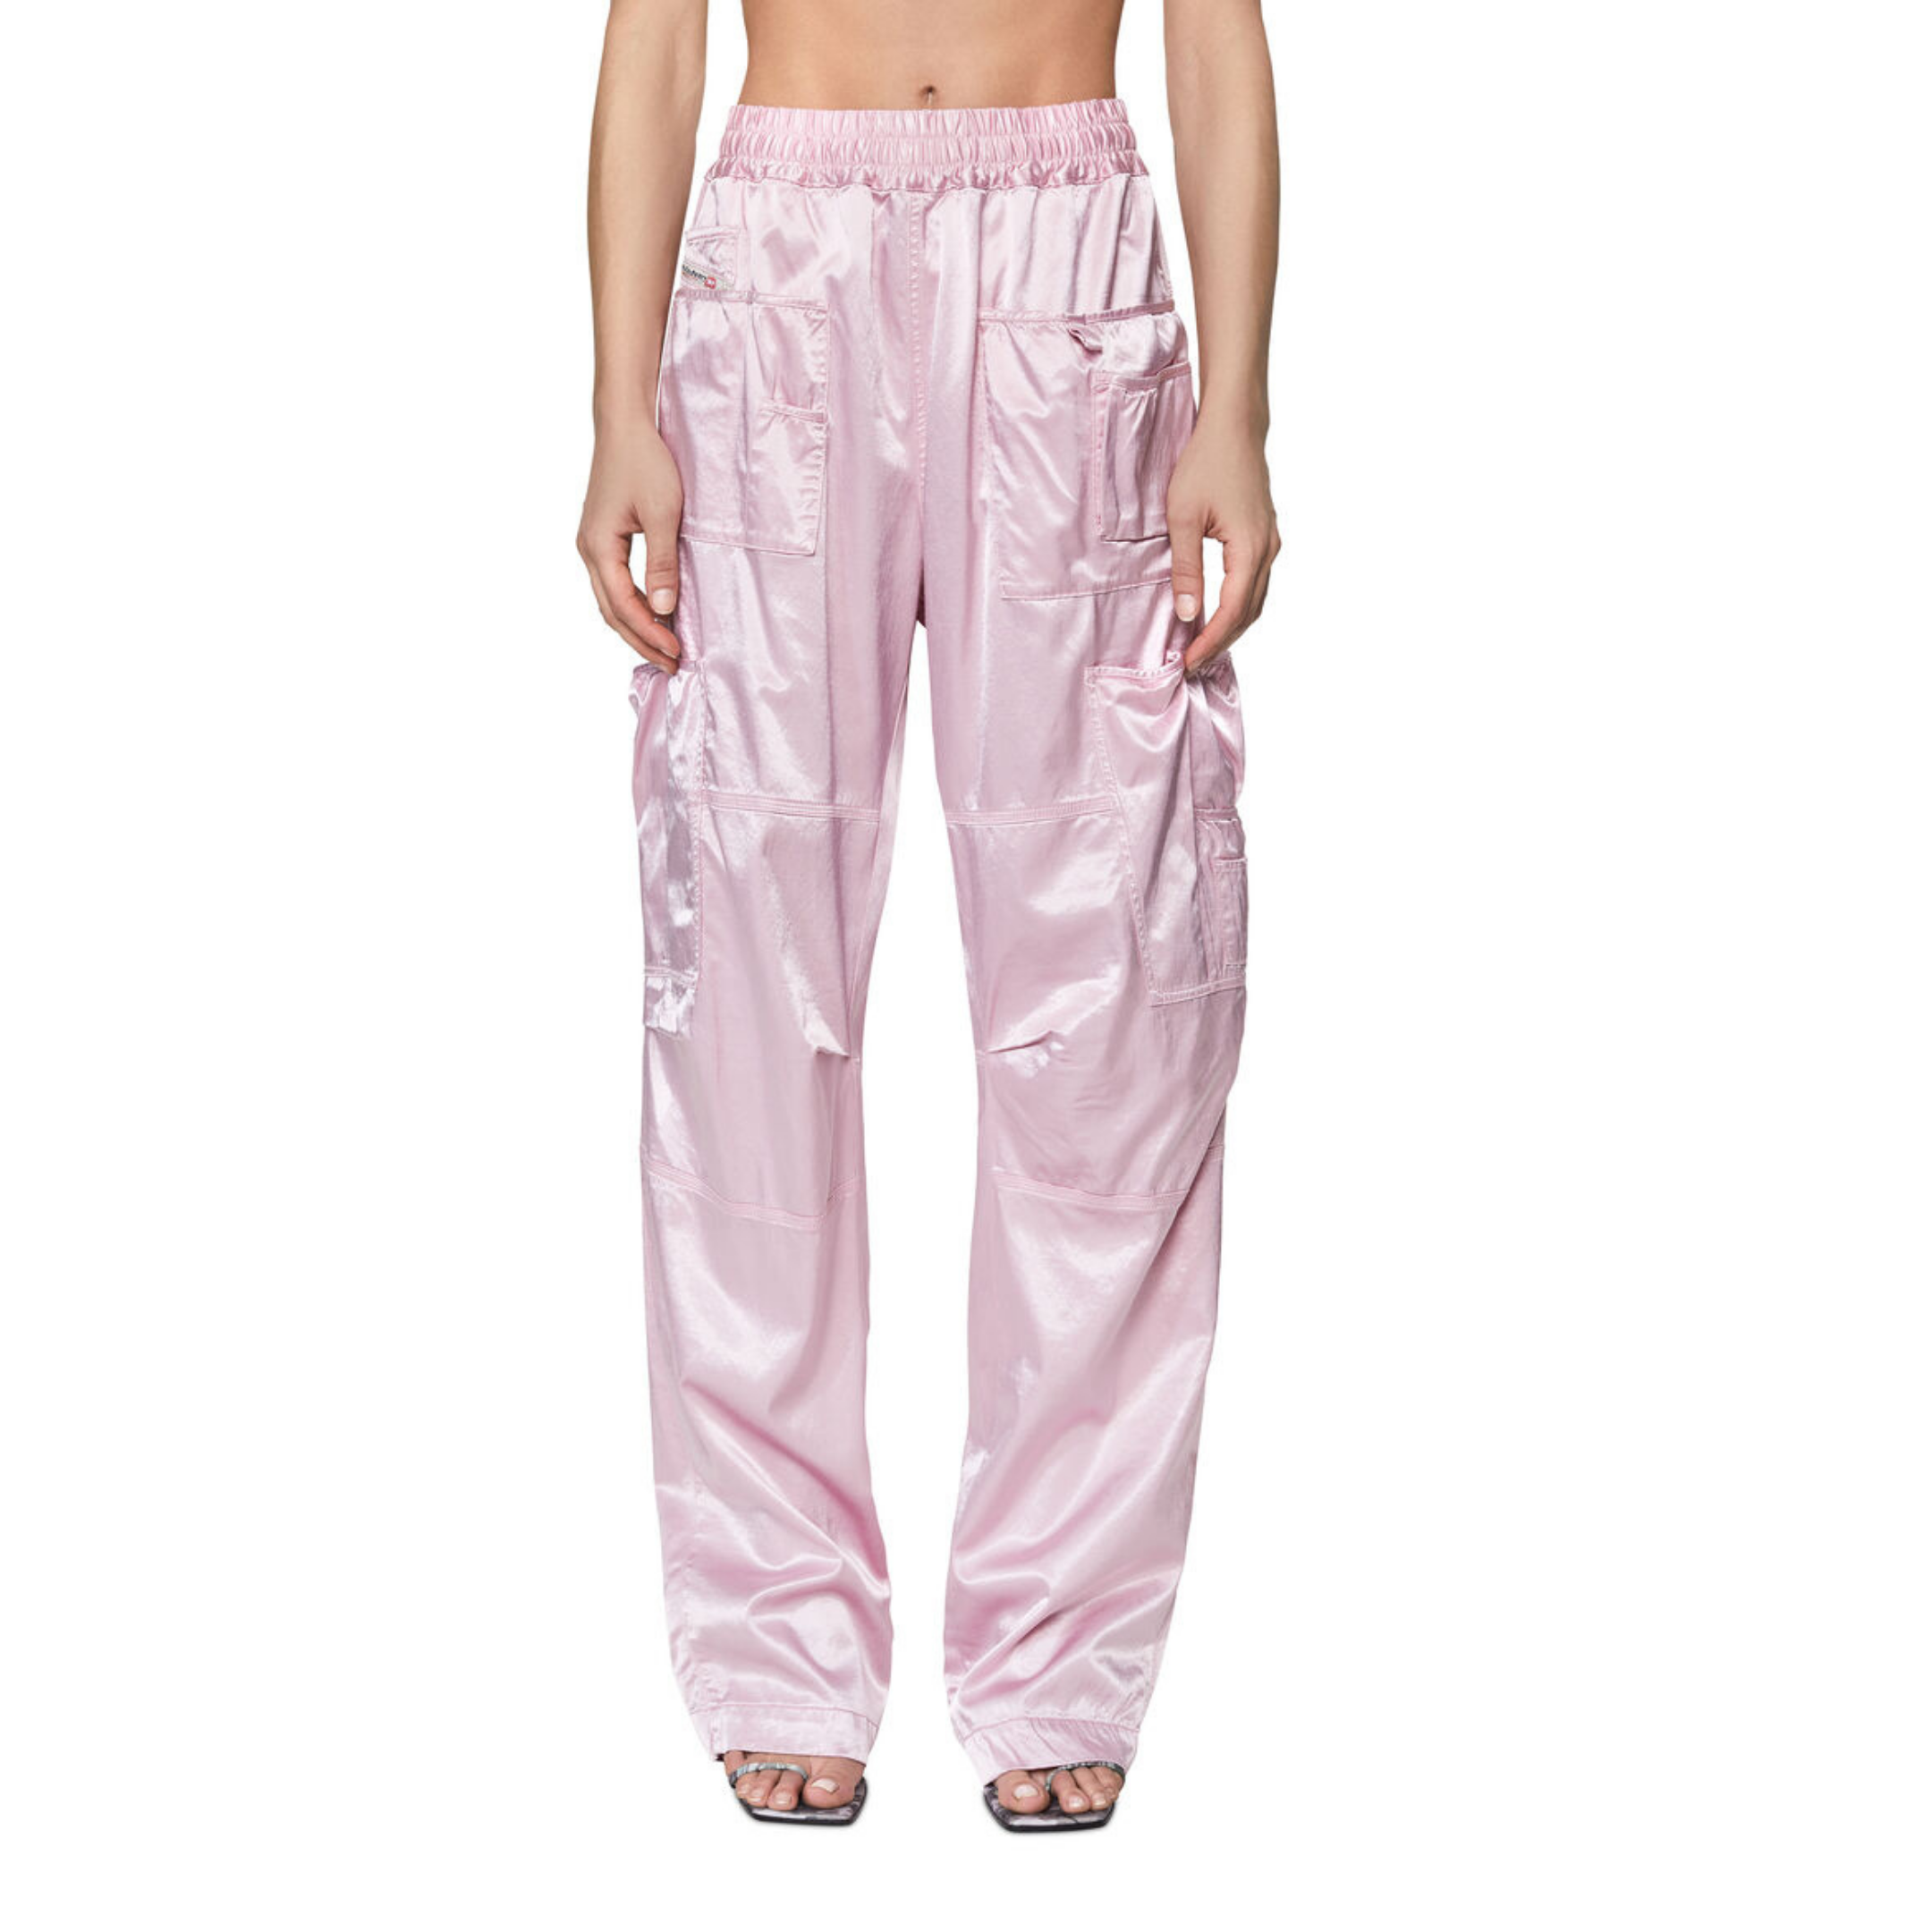 Parachute Pants Are The Cozy Cute Pants Trend Taking Over